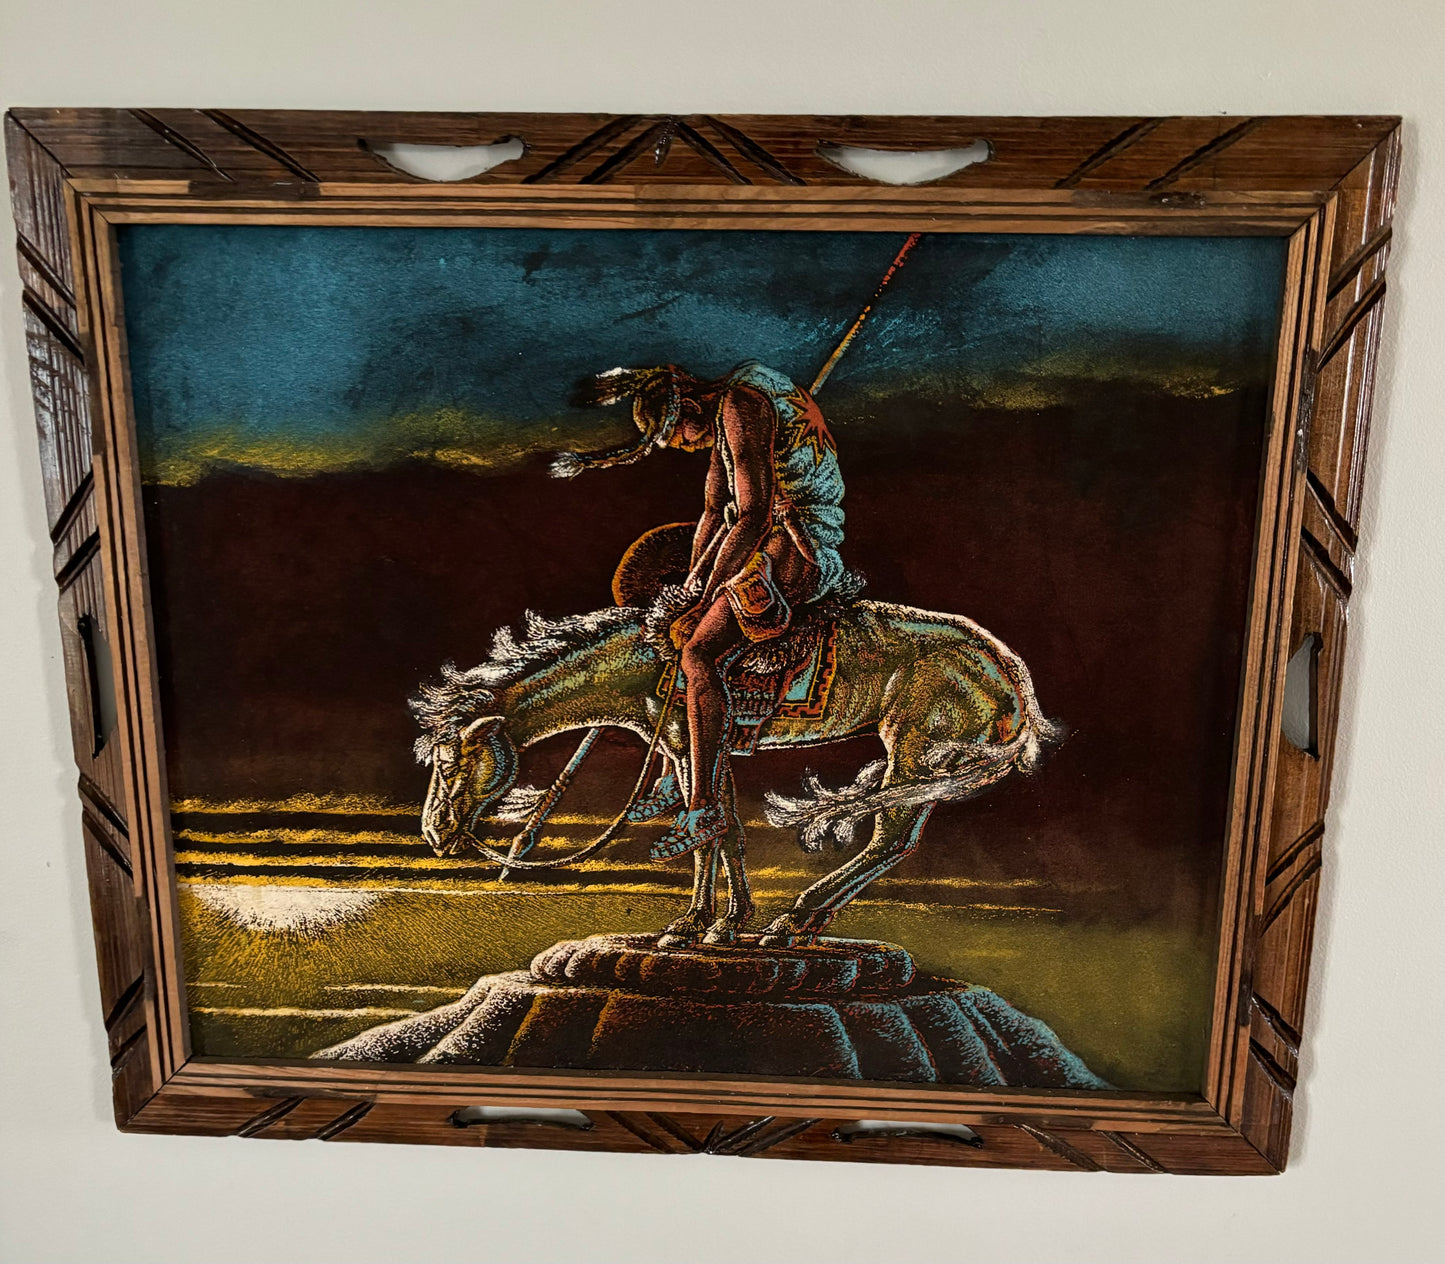 70’s Vintage Black Velvet Painting “End of Trail” with Wooded Frame | Hecho en Mexico